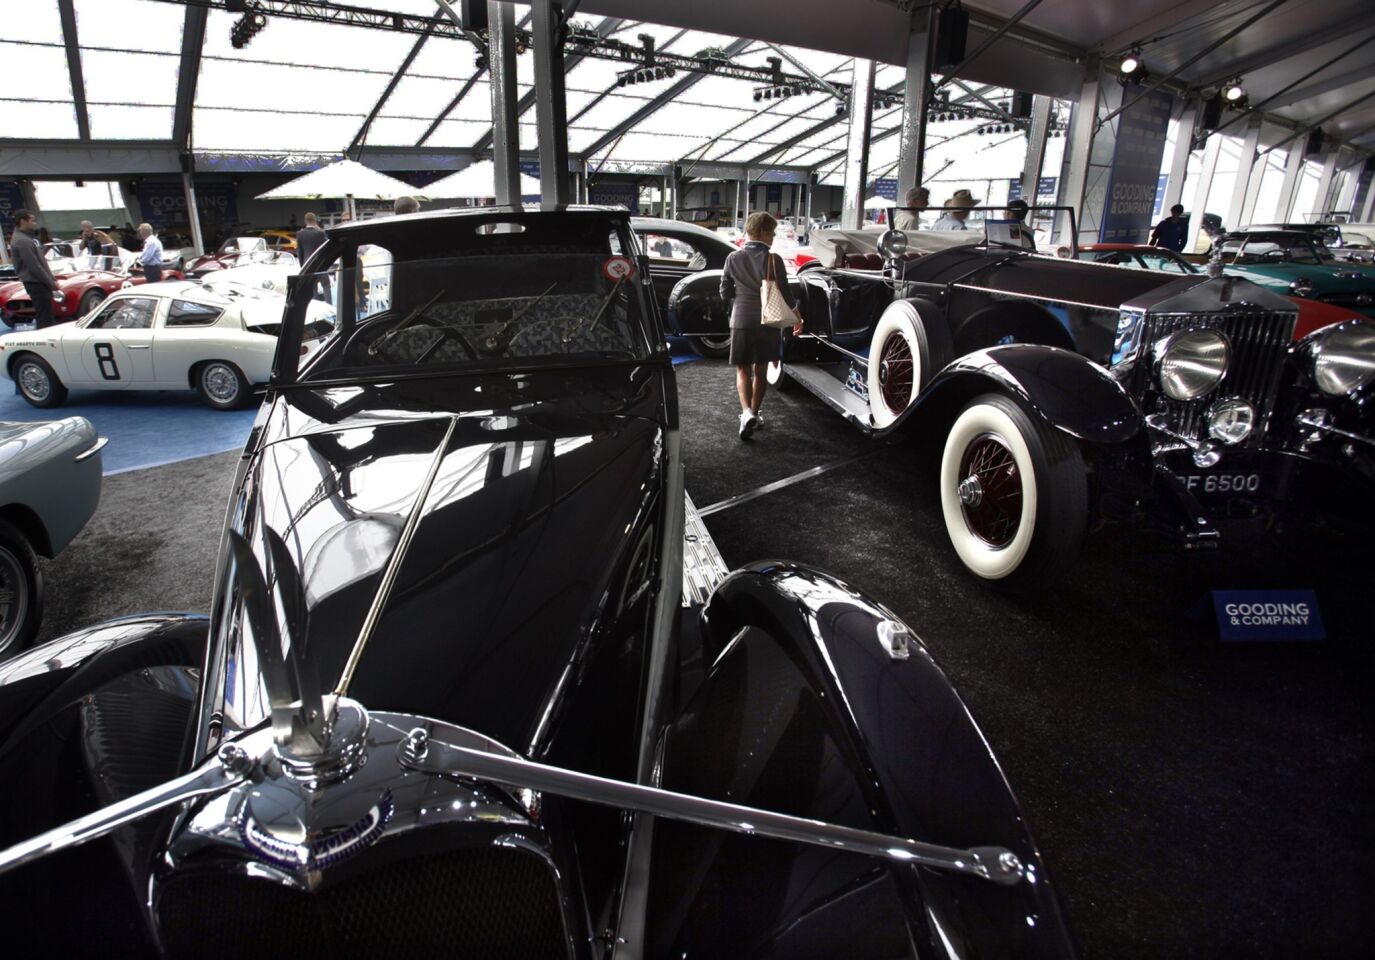 Expensive cars are lined up at the Concours d'Elegance weekend at Pebble Beach.